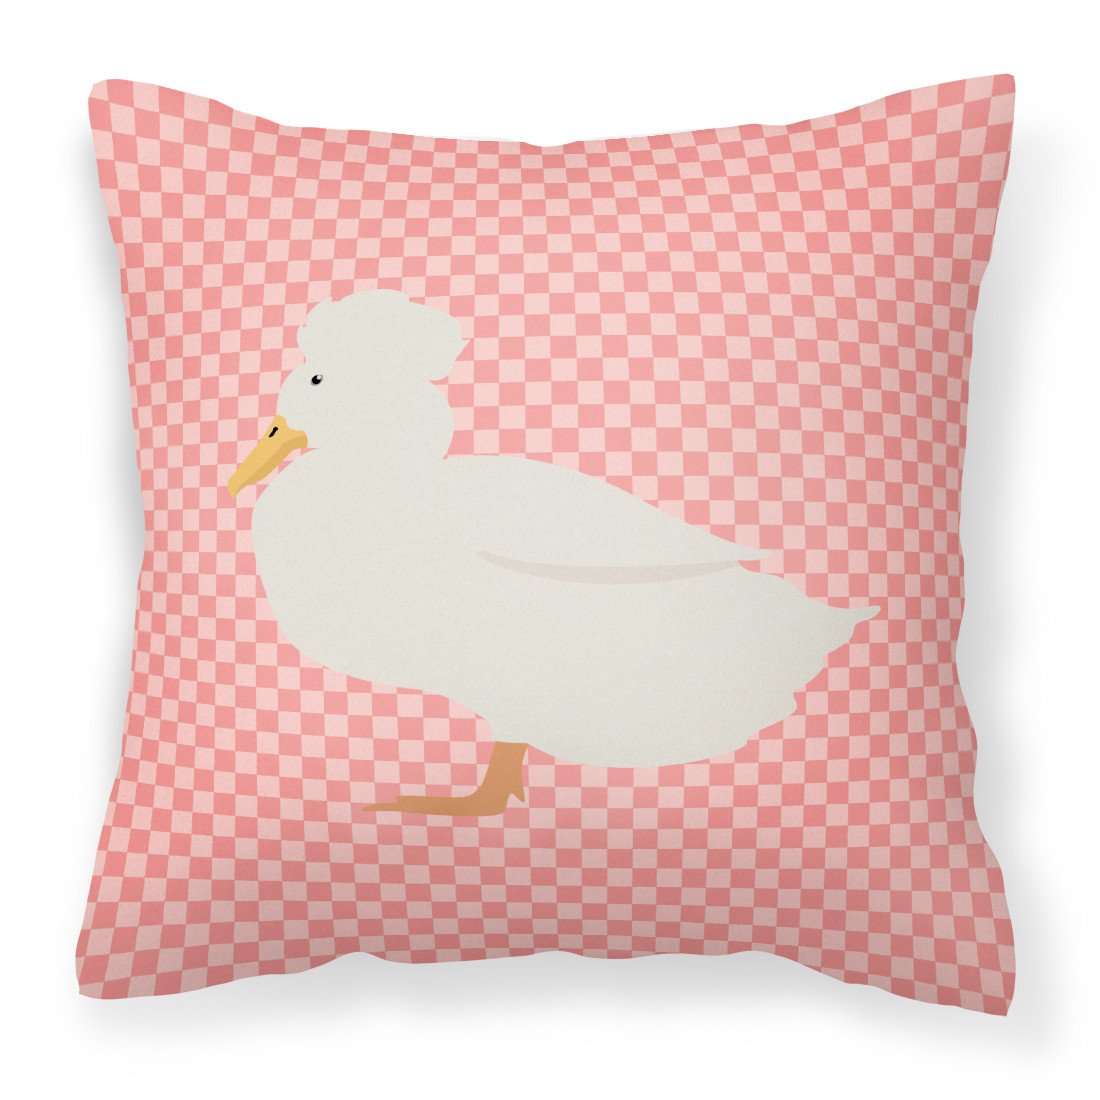 Crested Duck Pink Check Fabric Decorative Pillow BB7857PW1818 by Caroline's Treasures